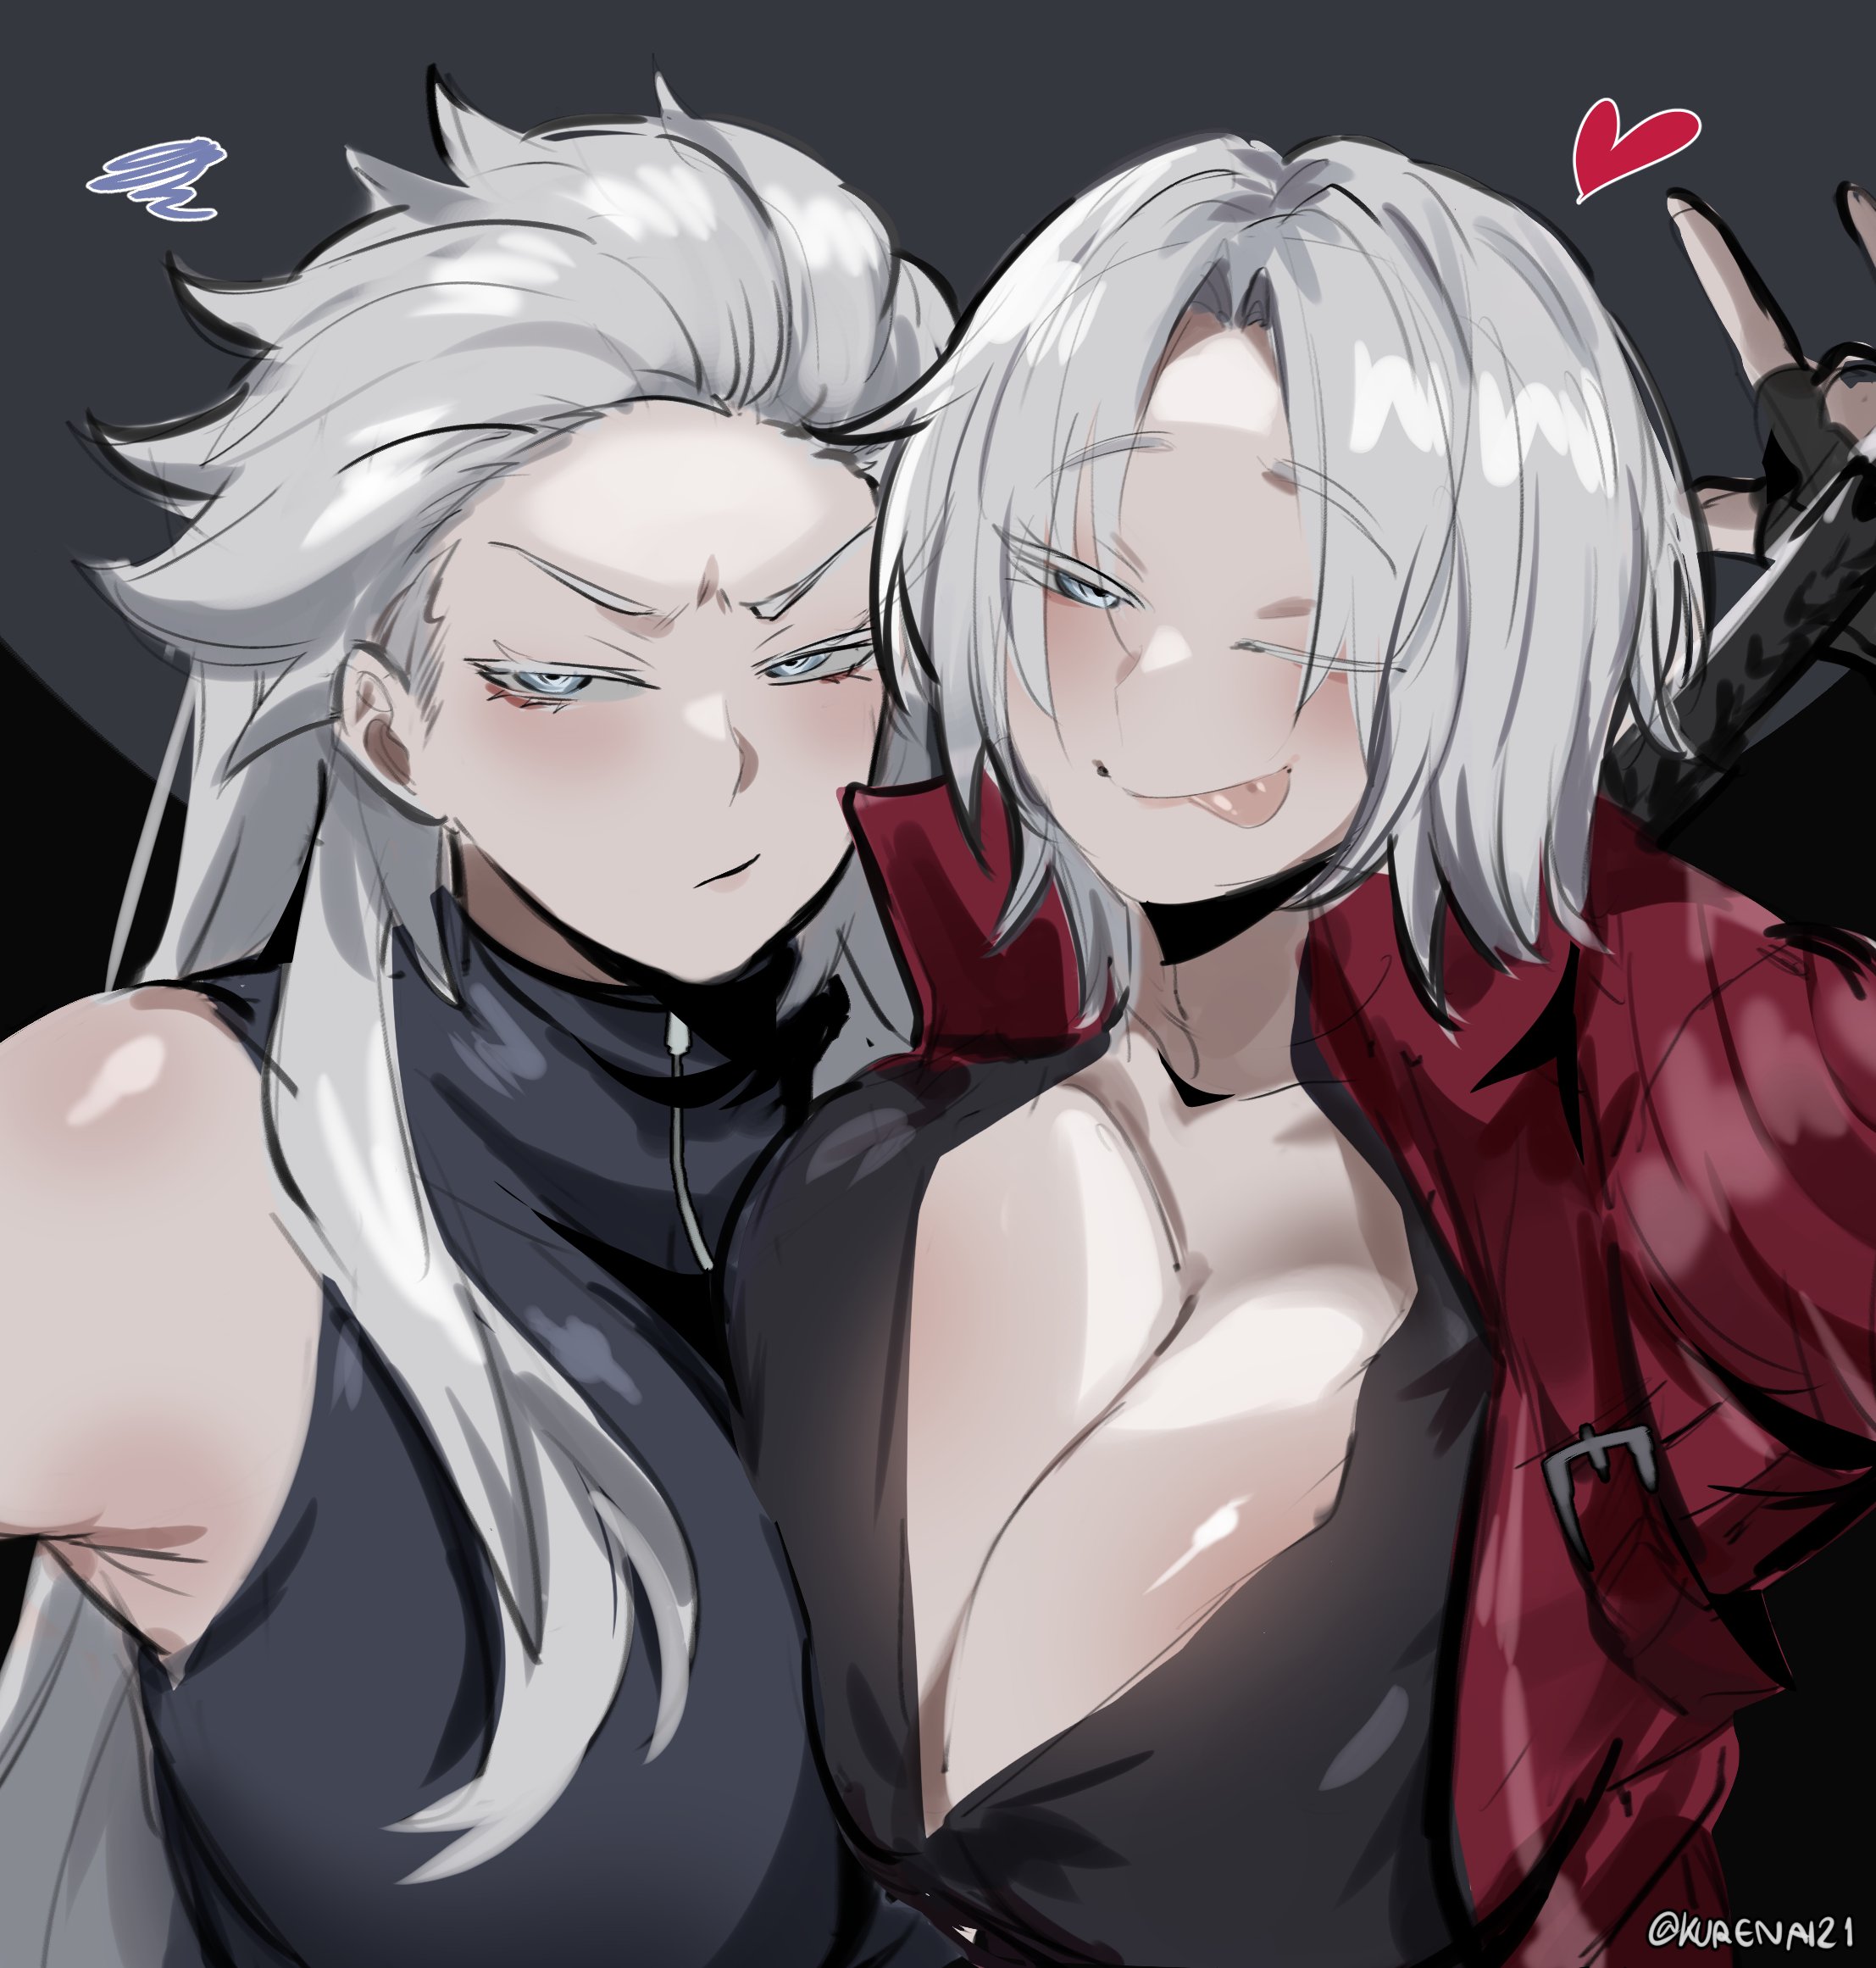 🔥🔥🔥 #Lady #DMC5  Devil may cry, Dante devil may cry, Crying